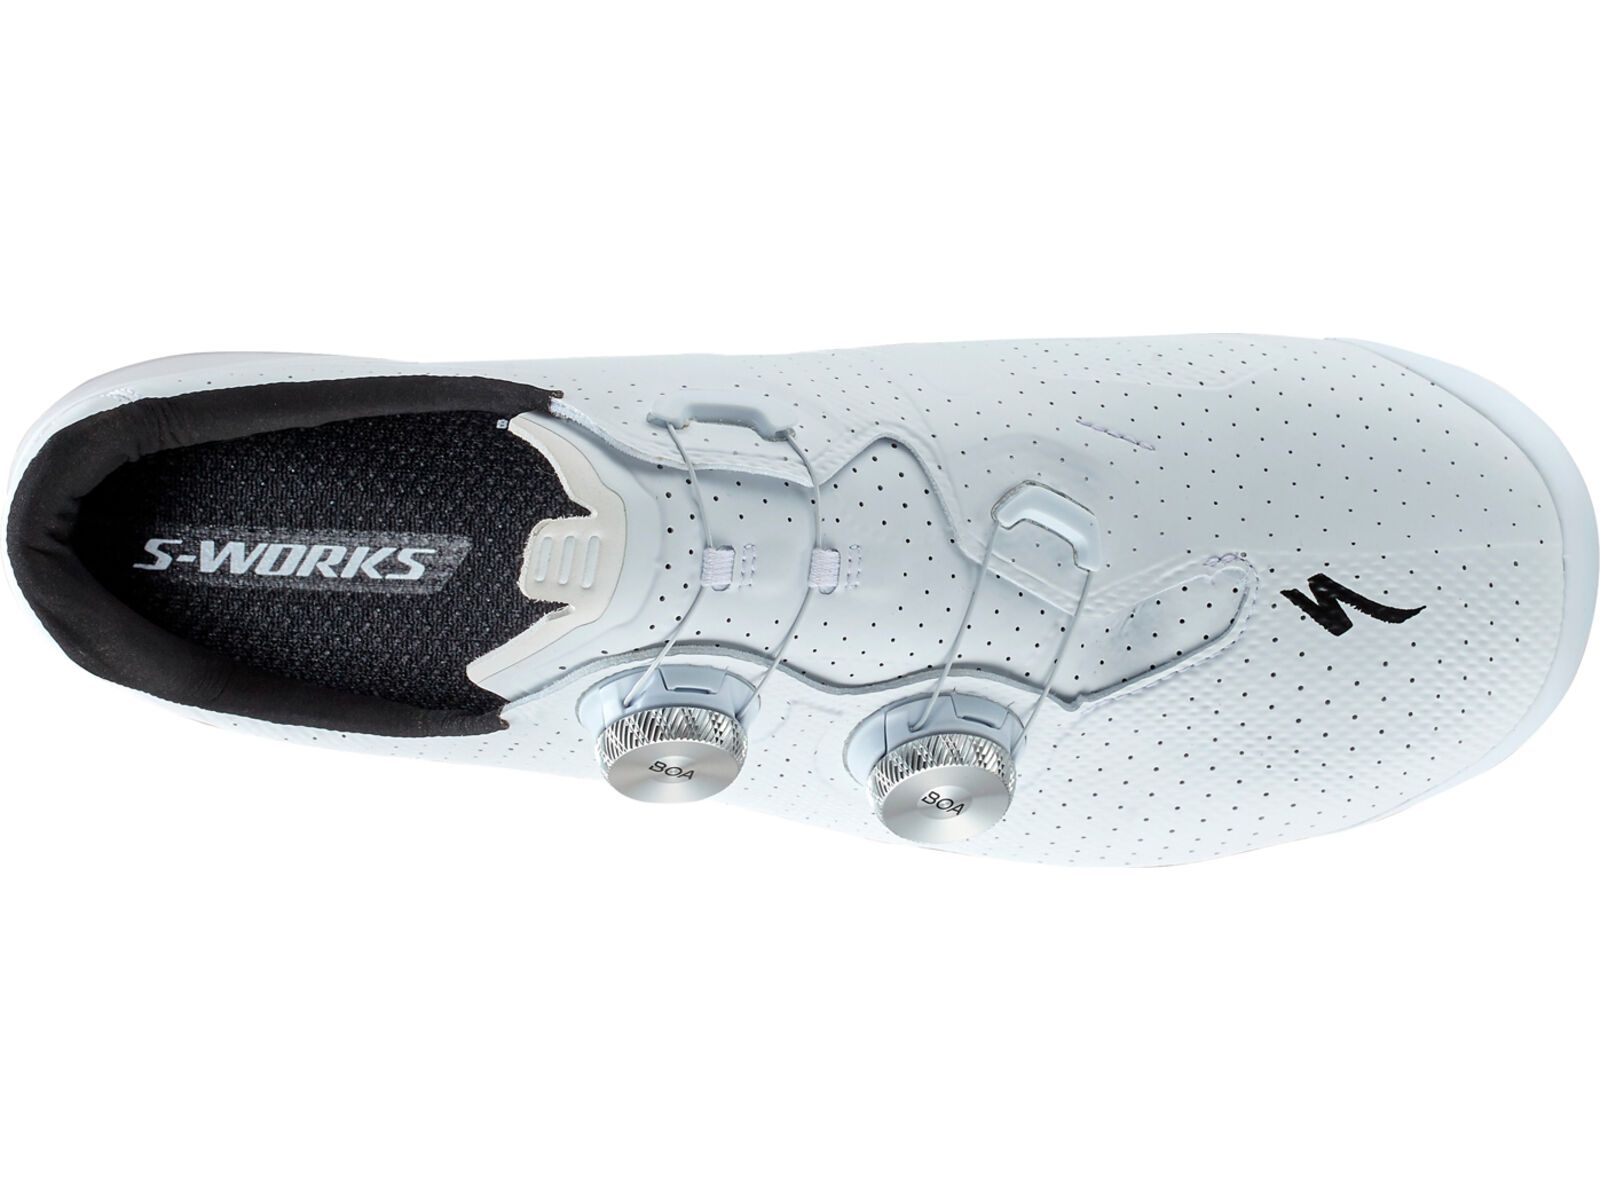 ***2. Wahl*** Specialized S-Works Torch Road white | Bild 4